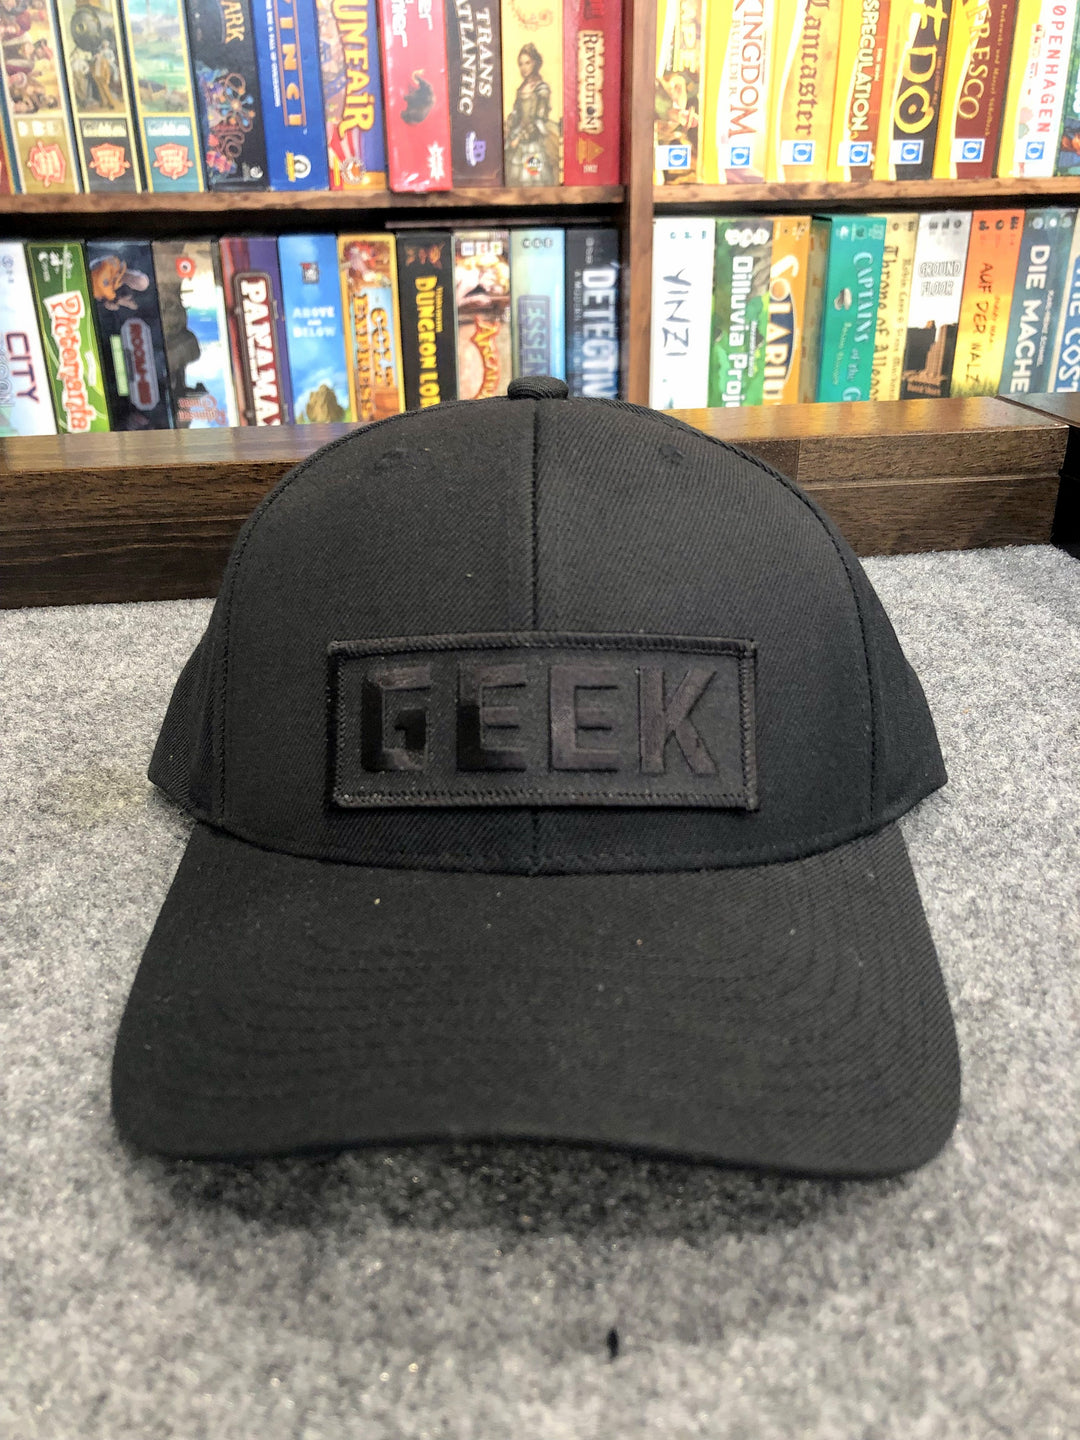 GEEK Baseball Cap for use with the board game REORDER, sold at the BoardGameGeek Store